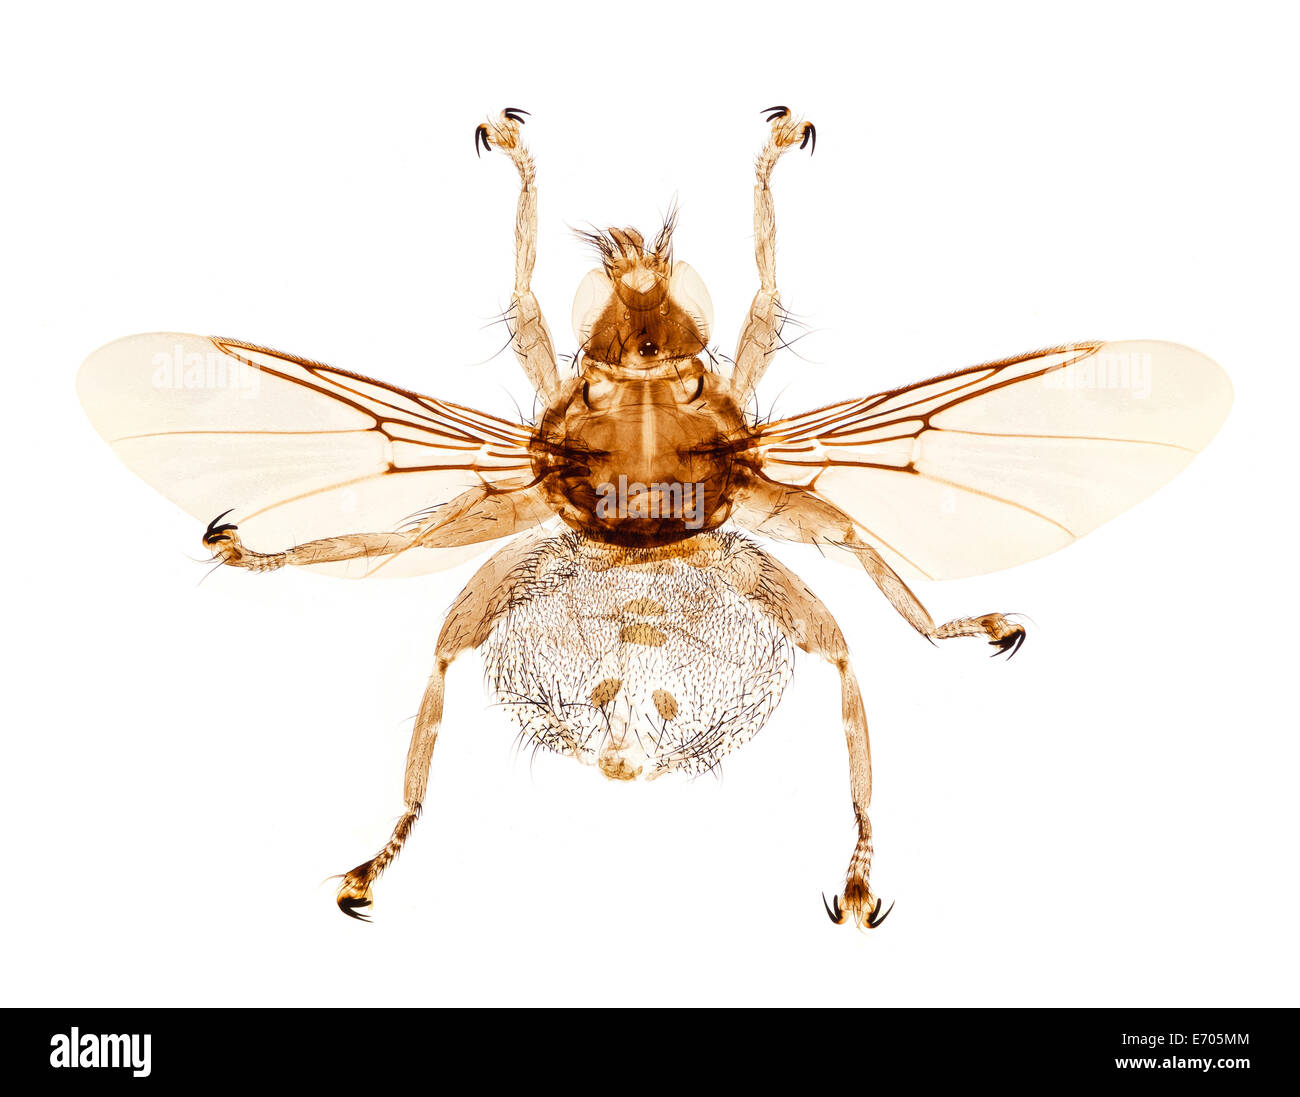 Louse fly with wings, brightfield photomicrograph Stock Photo